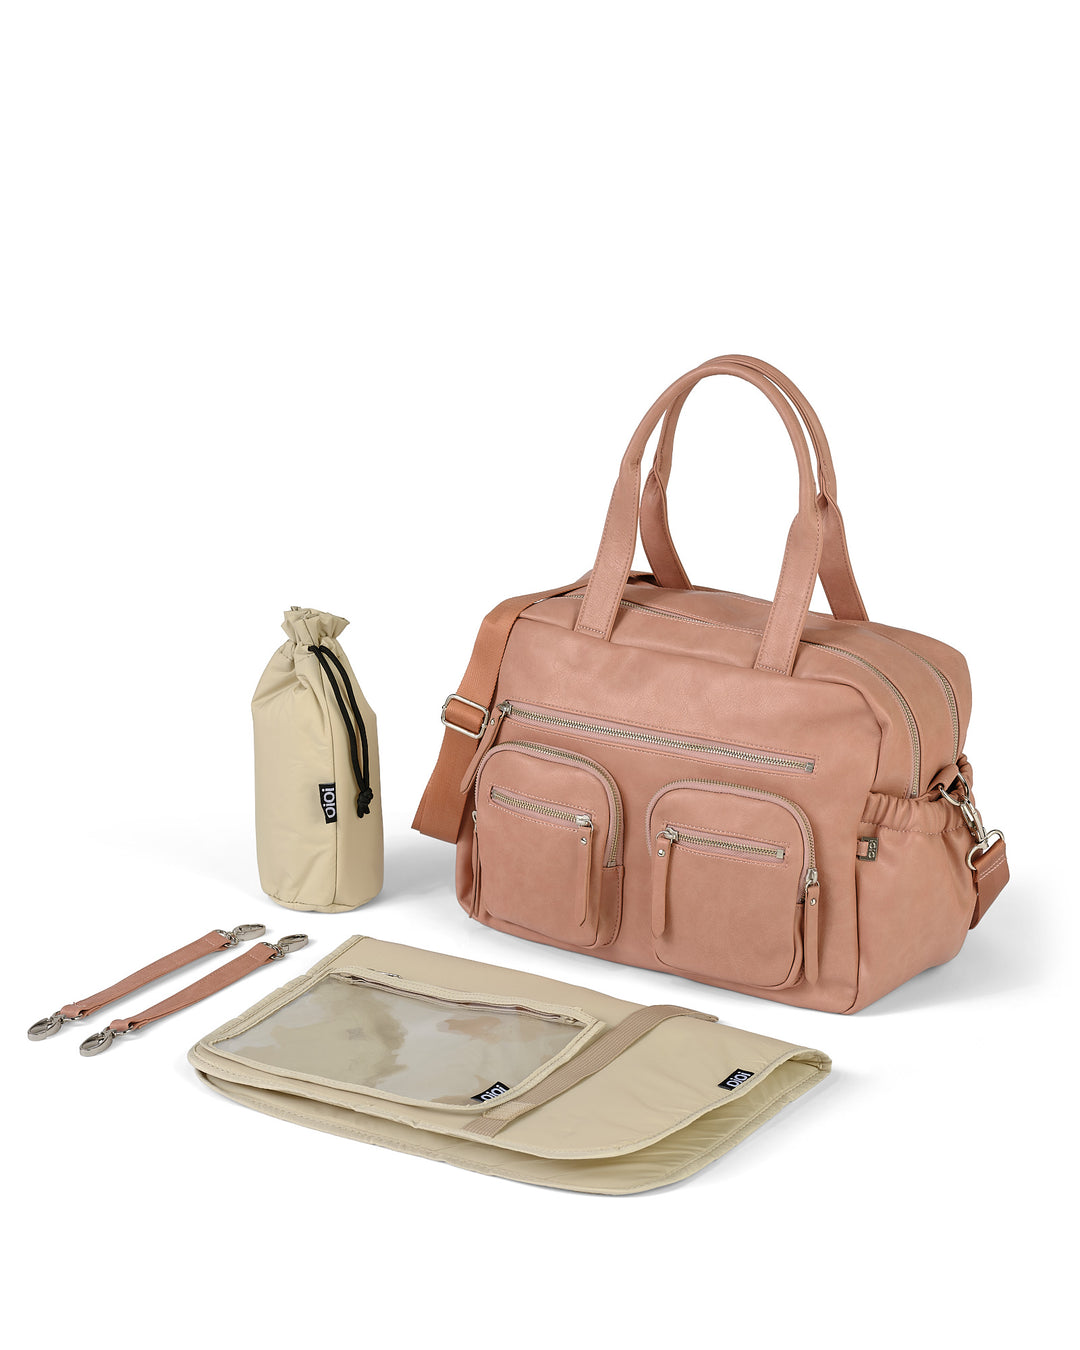 OiOi Carry All Nappy Bag - Dusty Rose